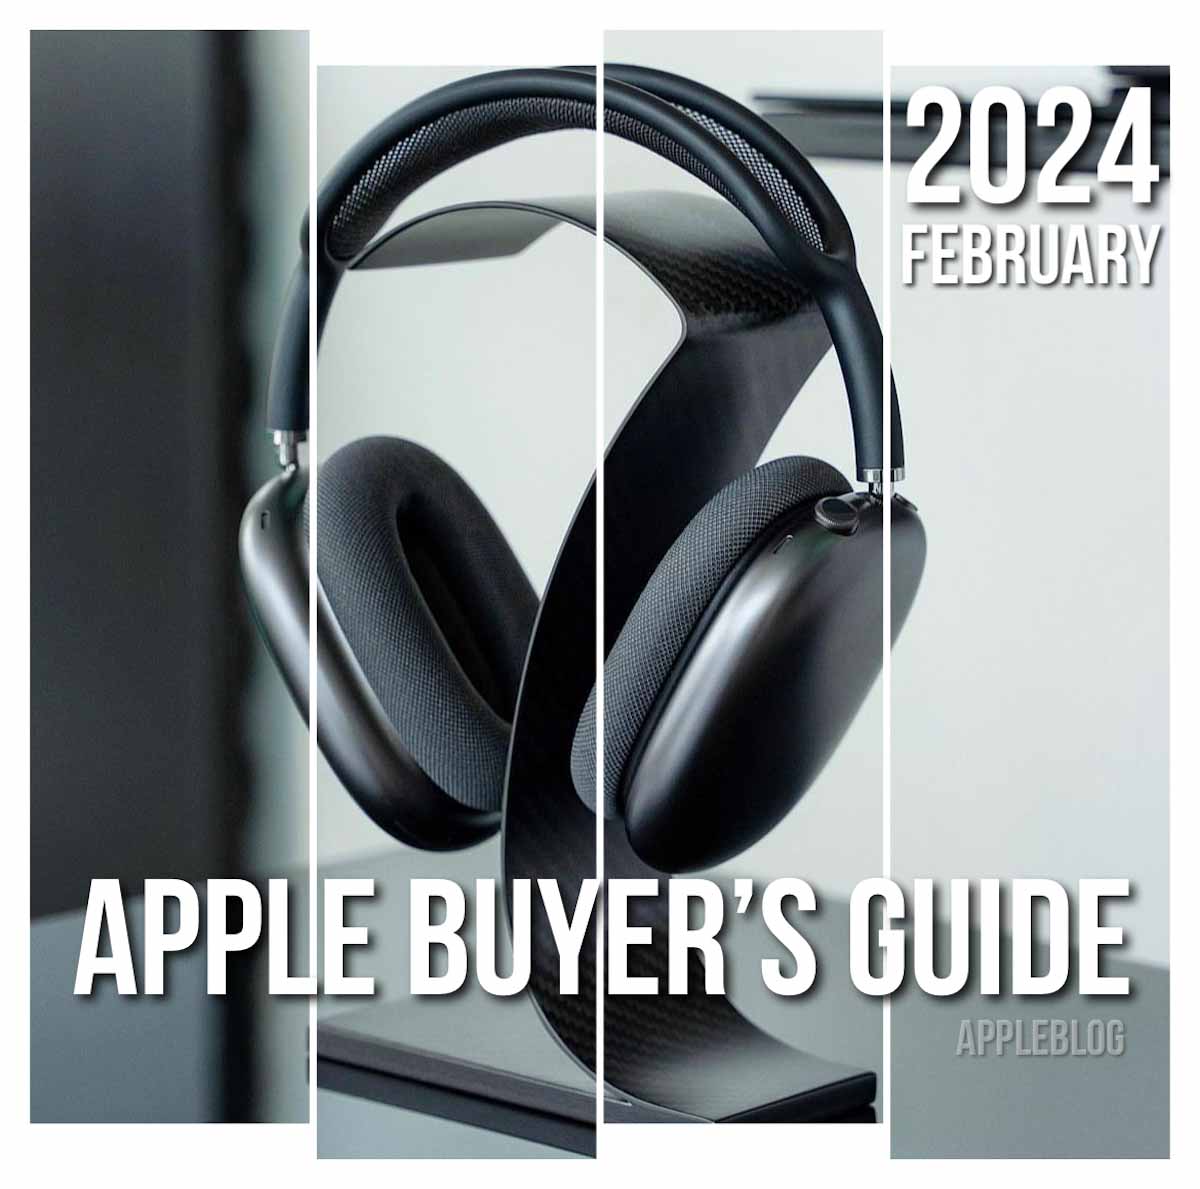 Here is Apple Buyer’s Guide for February 2024